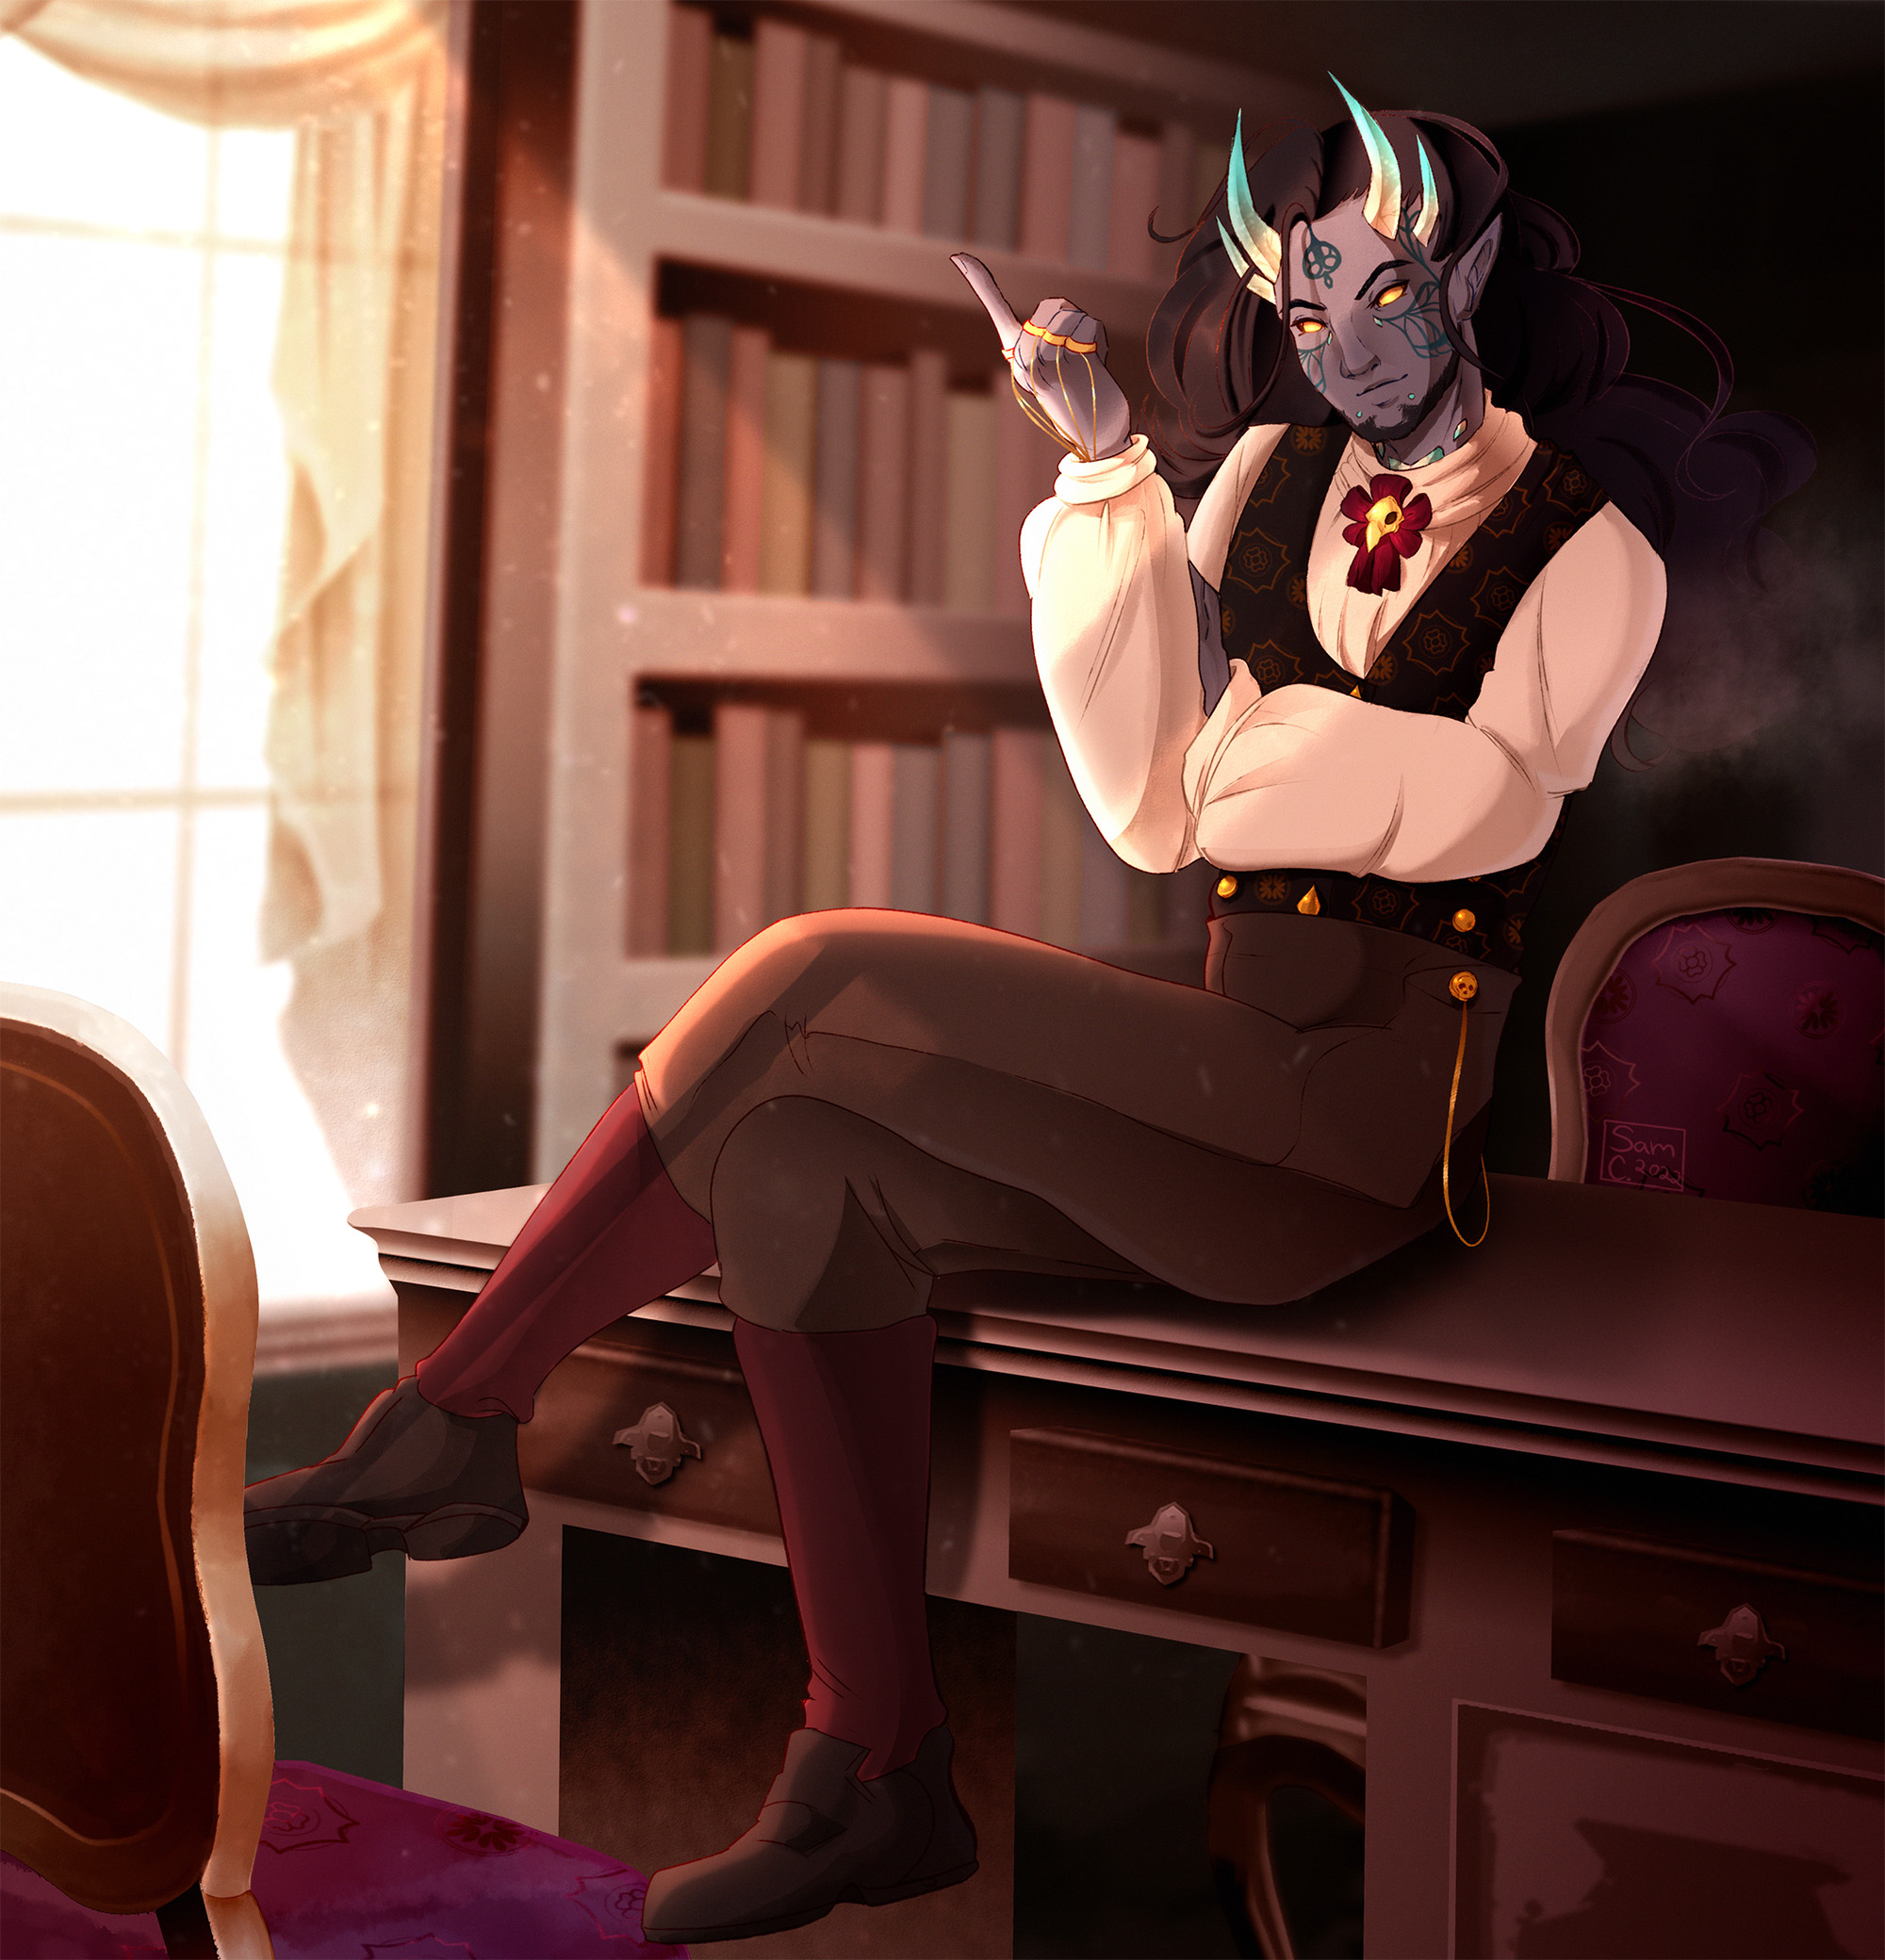  / "Meeting with Faust"
Illustration of a character named Faust, sitting in his office.
Done in Paint Tool Sai, 2022